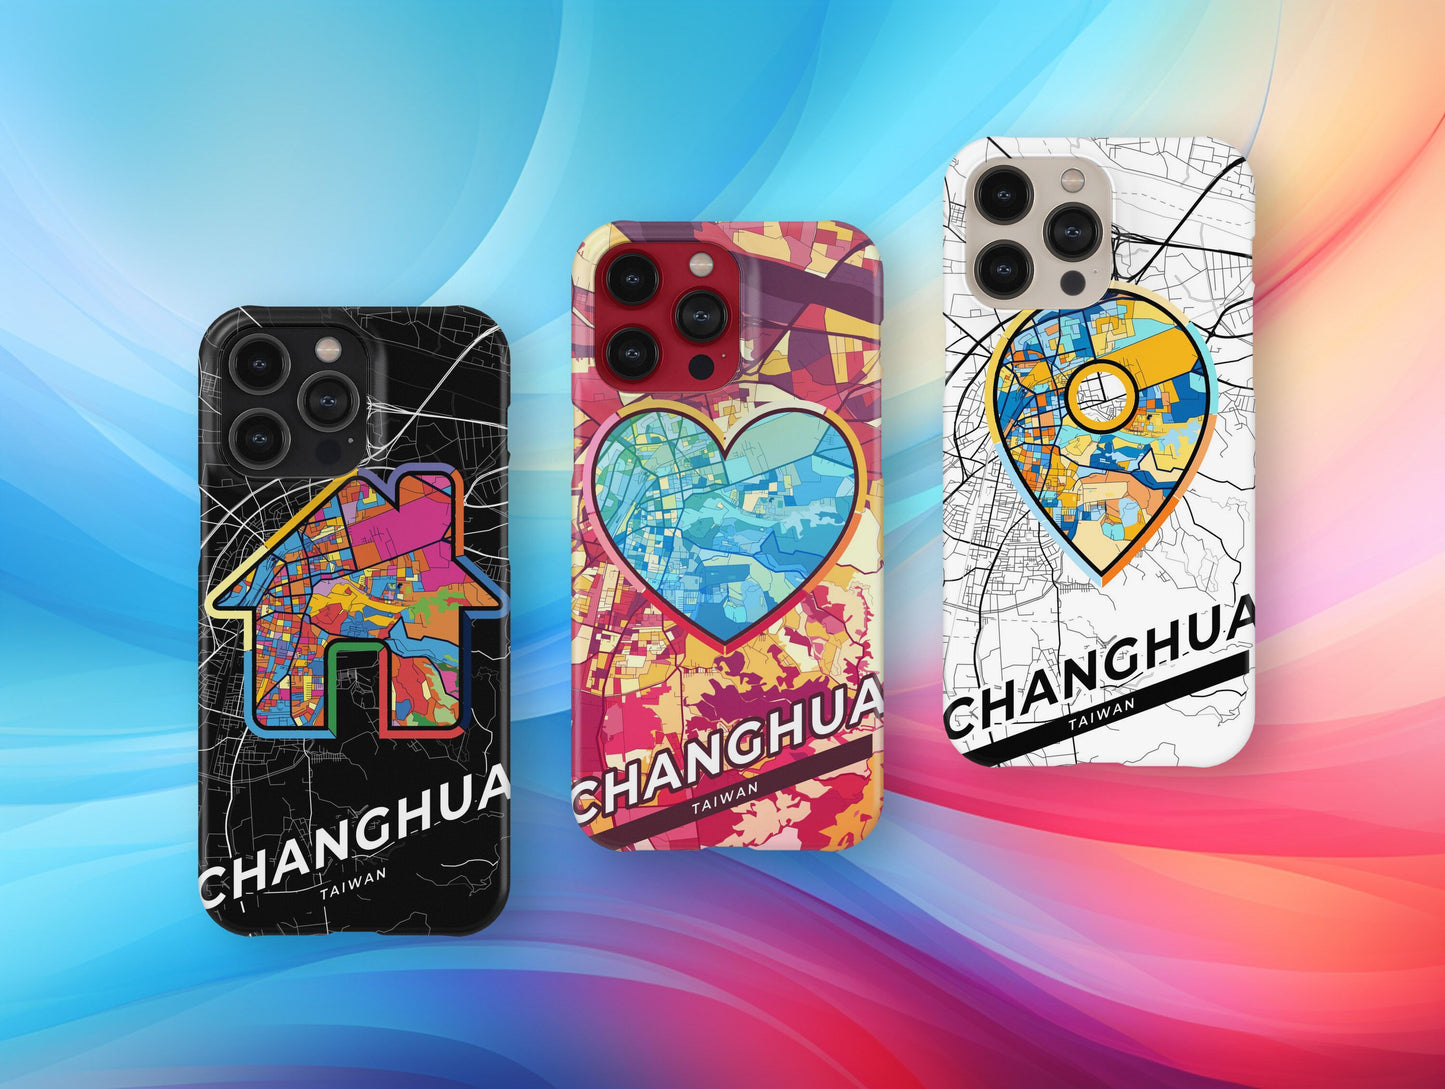 Changhua Taiwan slim phone case with colorful icon. Birthday, wedding or housewarming gift. Couple match cases.